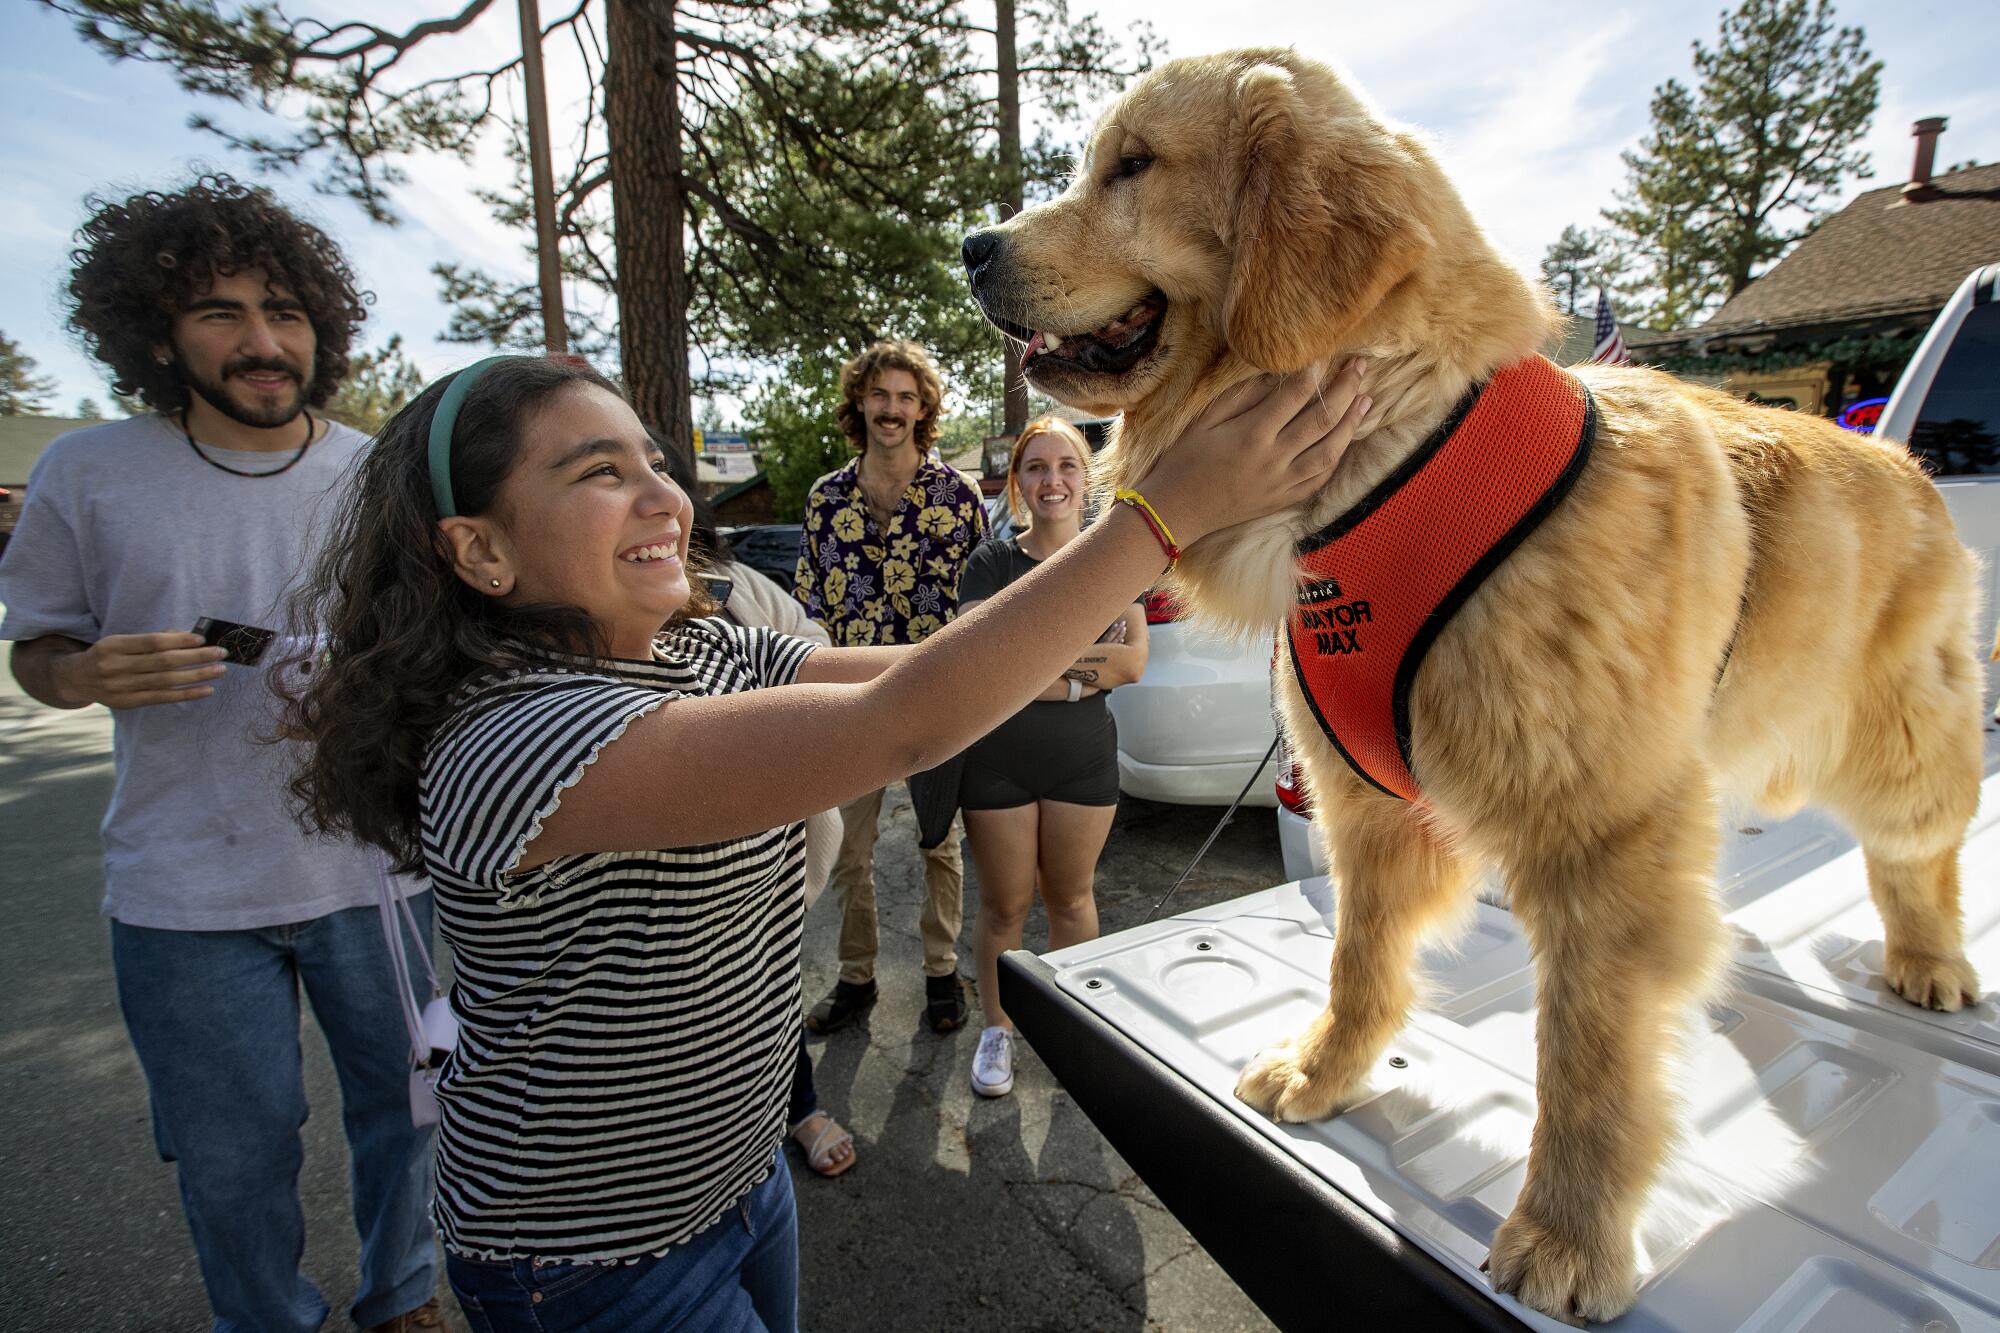 People line up to greet a golden retriever.